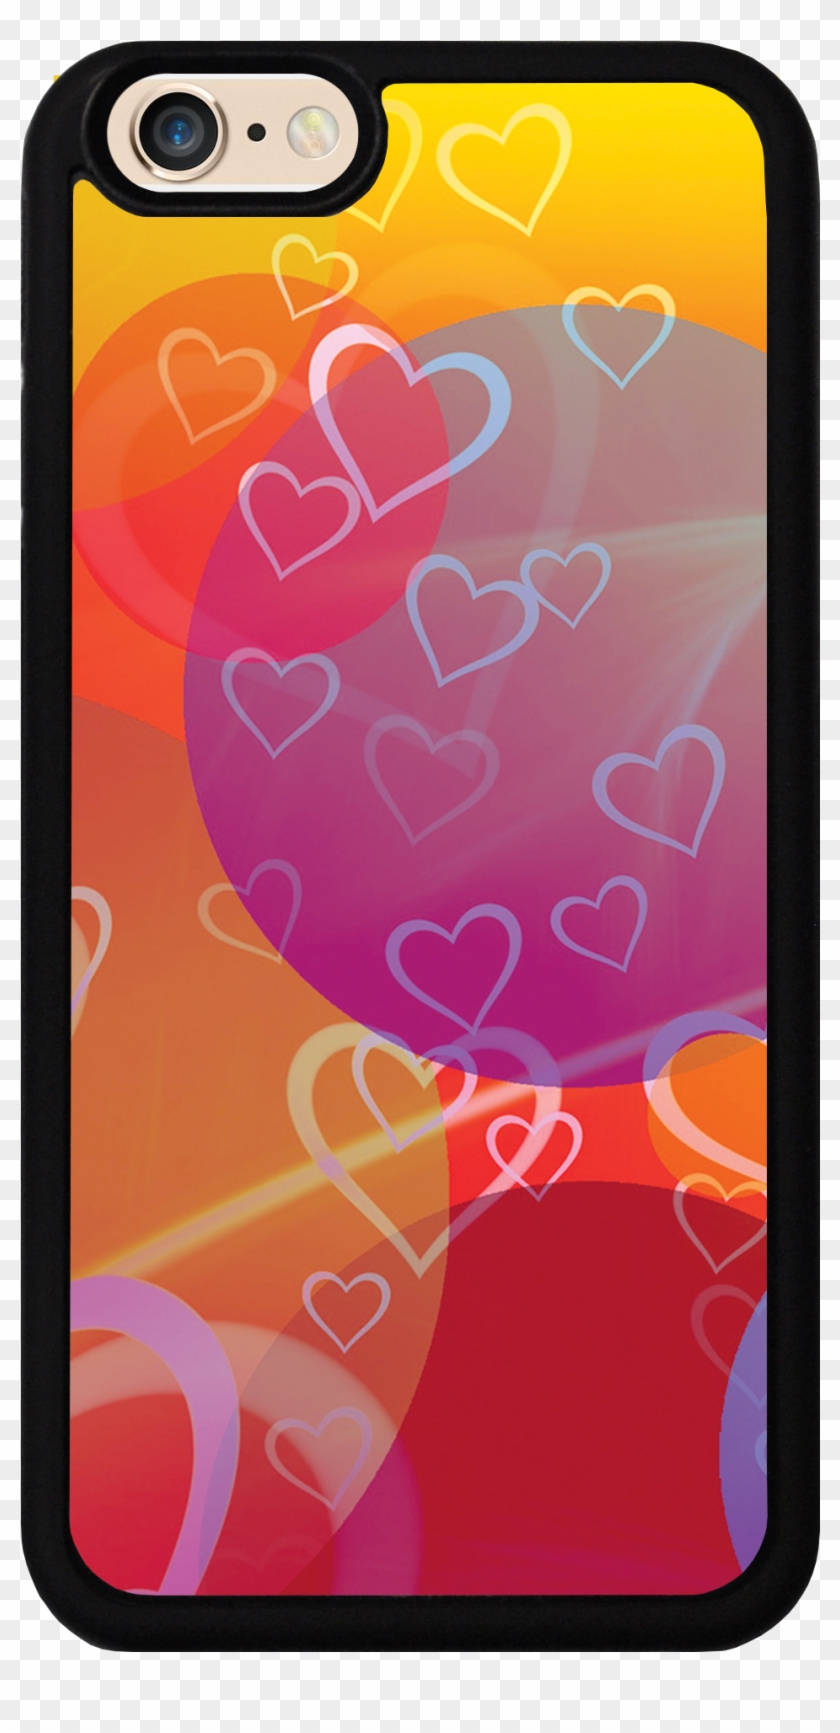 Heart In A Bubble For Lg G2 - Mobile Phone Case Clipart #1468950